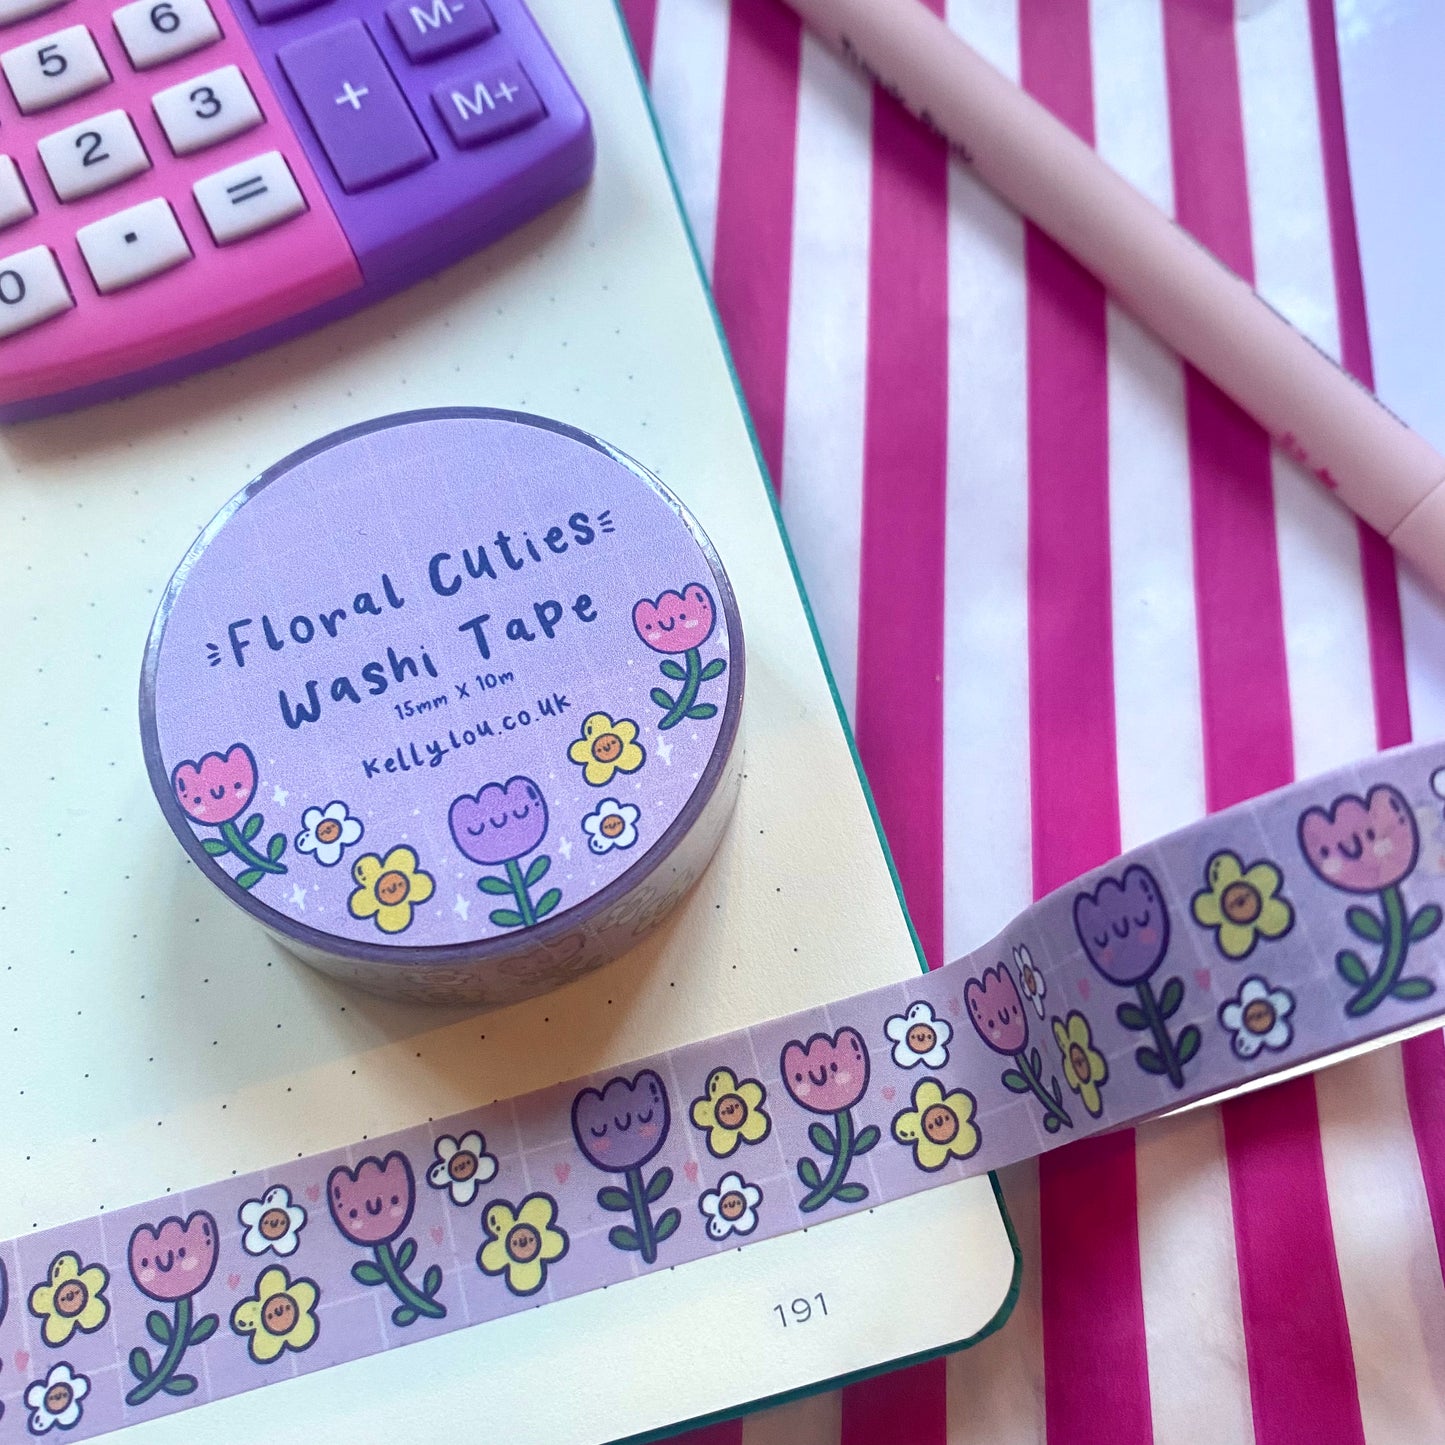 Floral Cuties Washi Tape